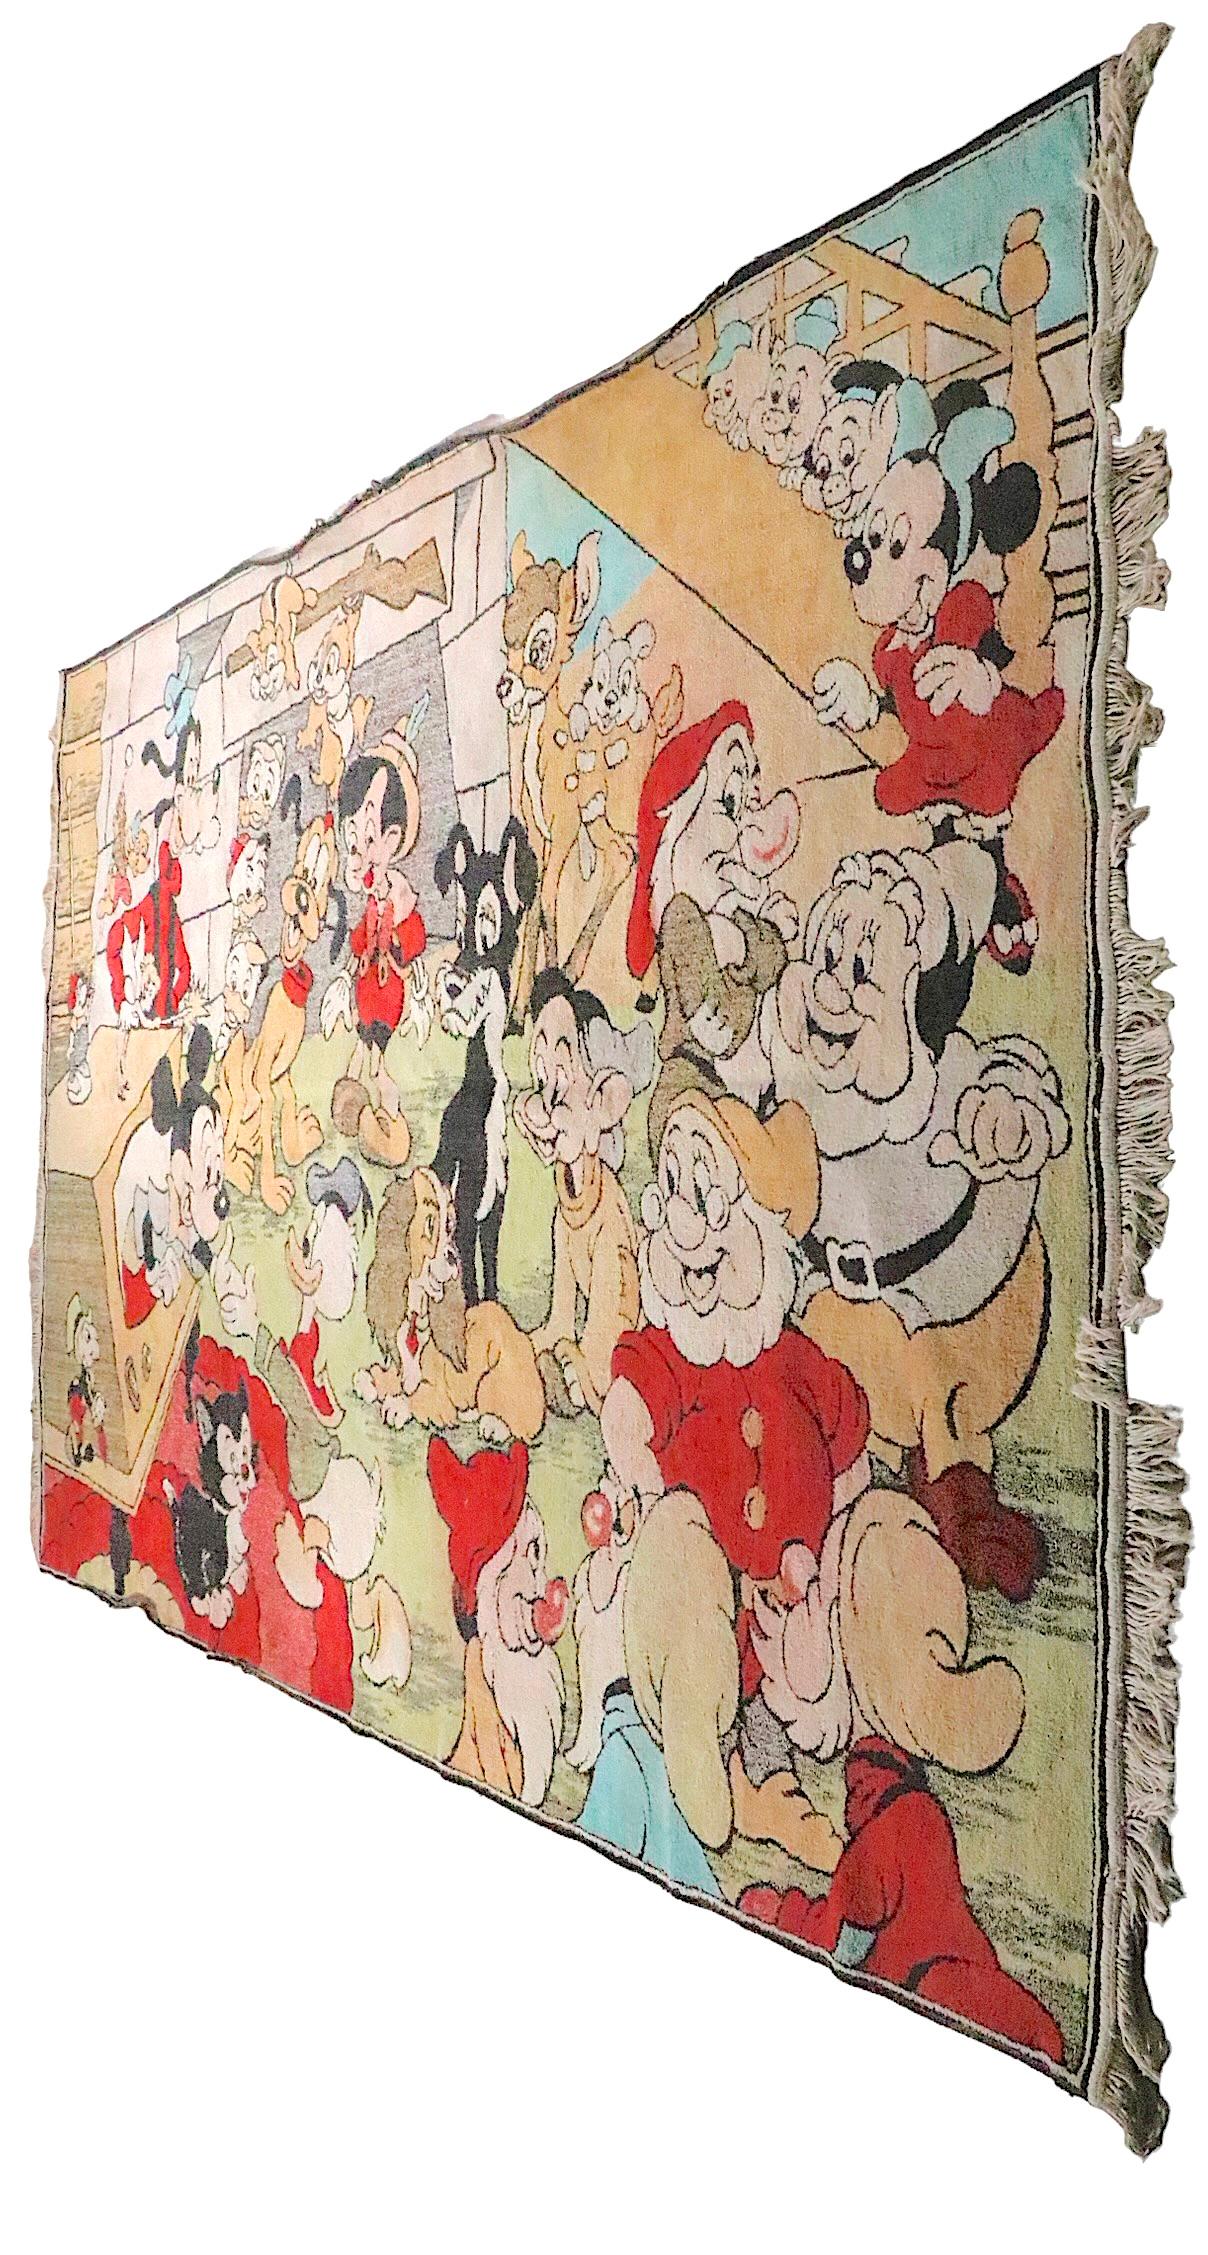 Vintage 1960's  Disney themed rug, sometimes referred to as a Play Pen Rug, we believe it is a Quetta product made in Pakistan. The rug features a virtual who's who of Disney characters, Mickey, Donald, Goofy, Snow White and the Seven Dwarfs etc